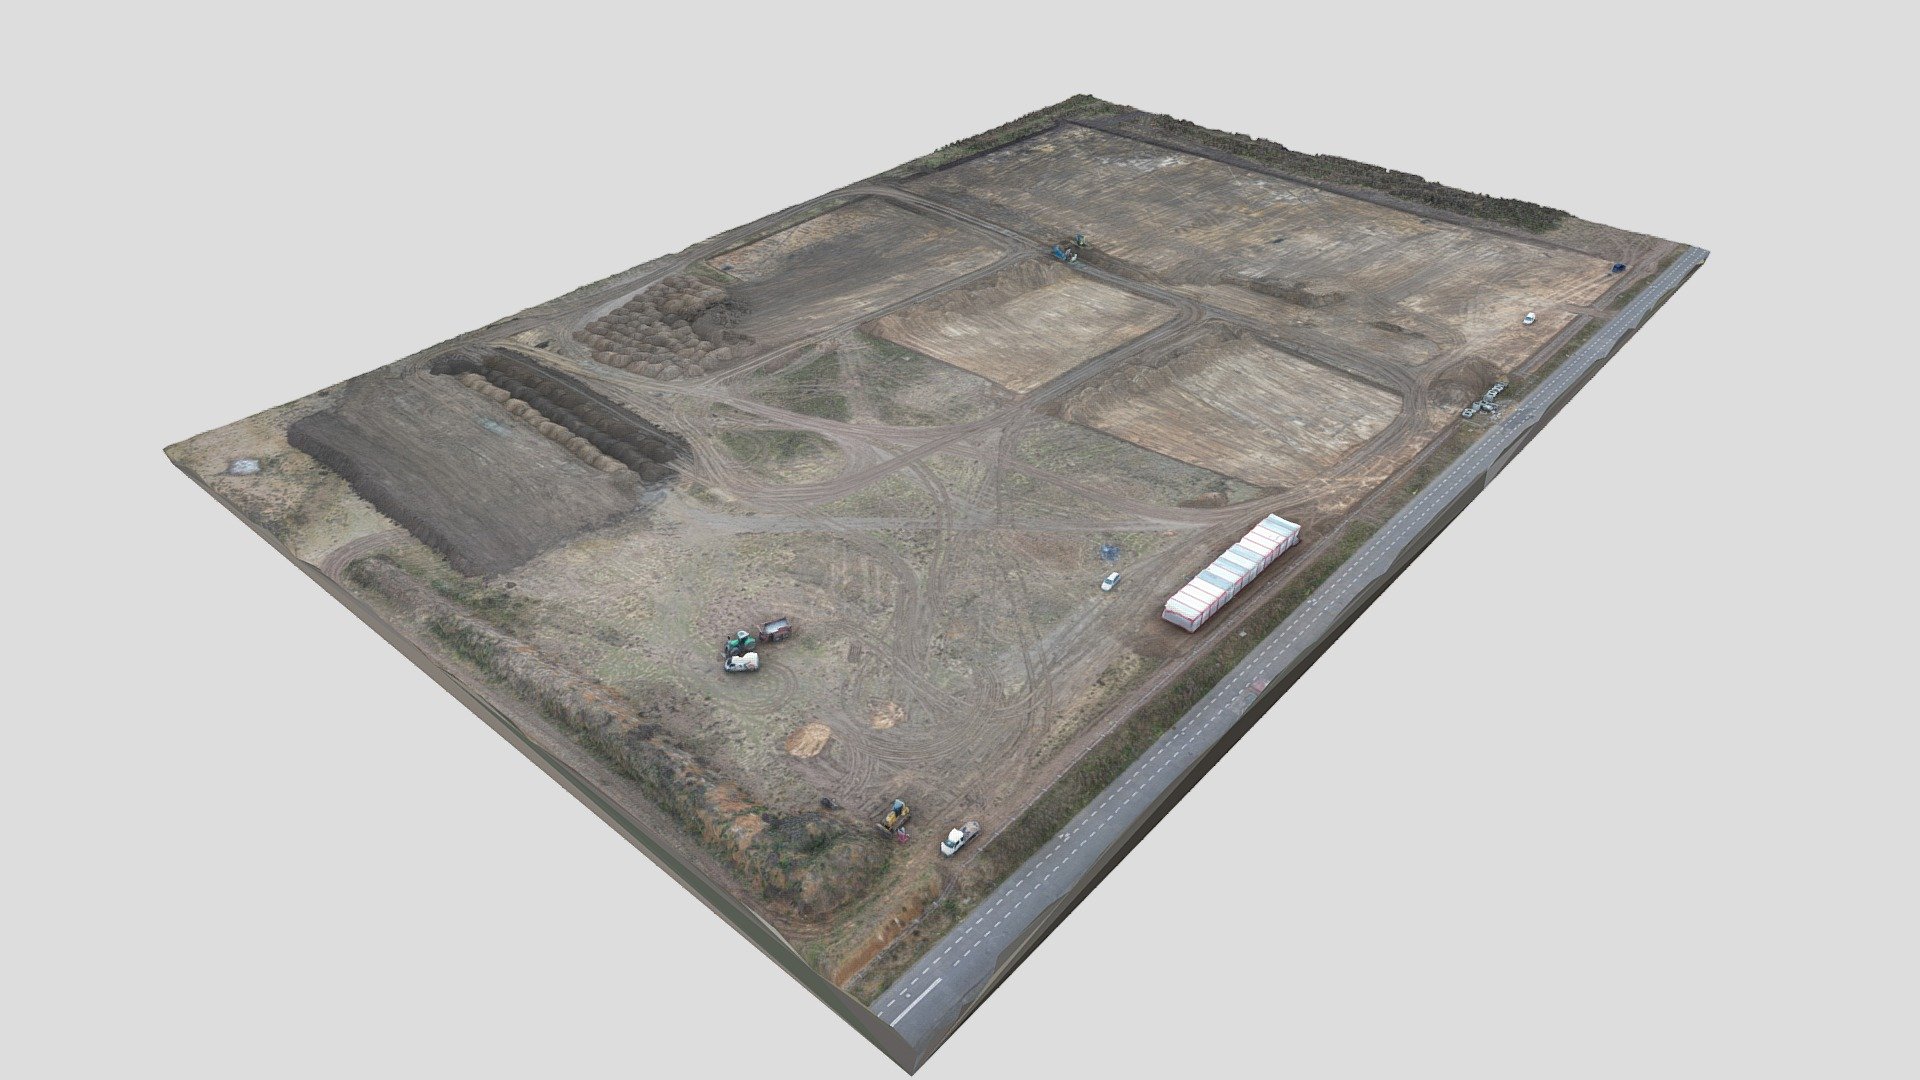 Construction excavation. The first stage of construction of a production hall. 
Model 3D created in RealityCapture by Capturing Reality from 1381 images - Dij mini 3 pro 3d model